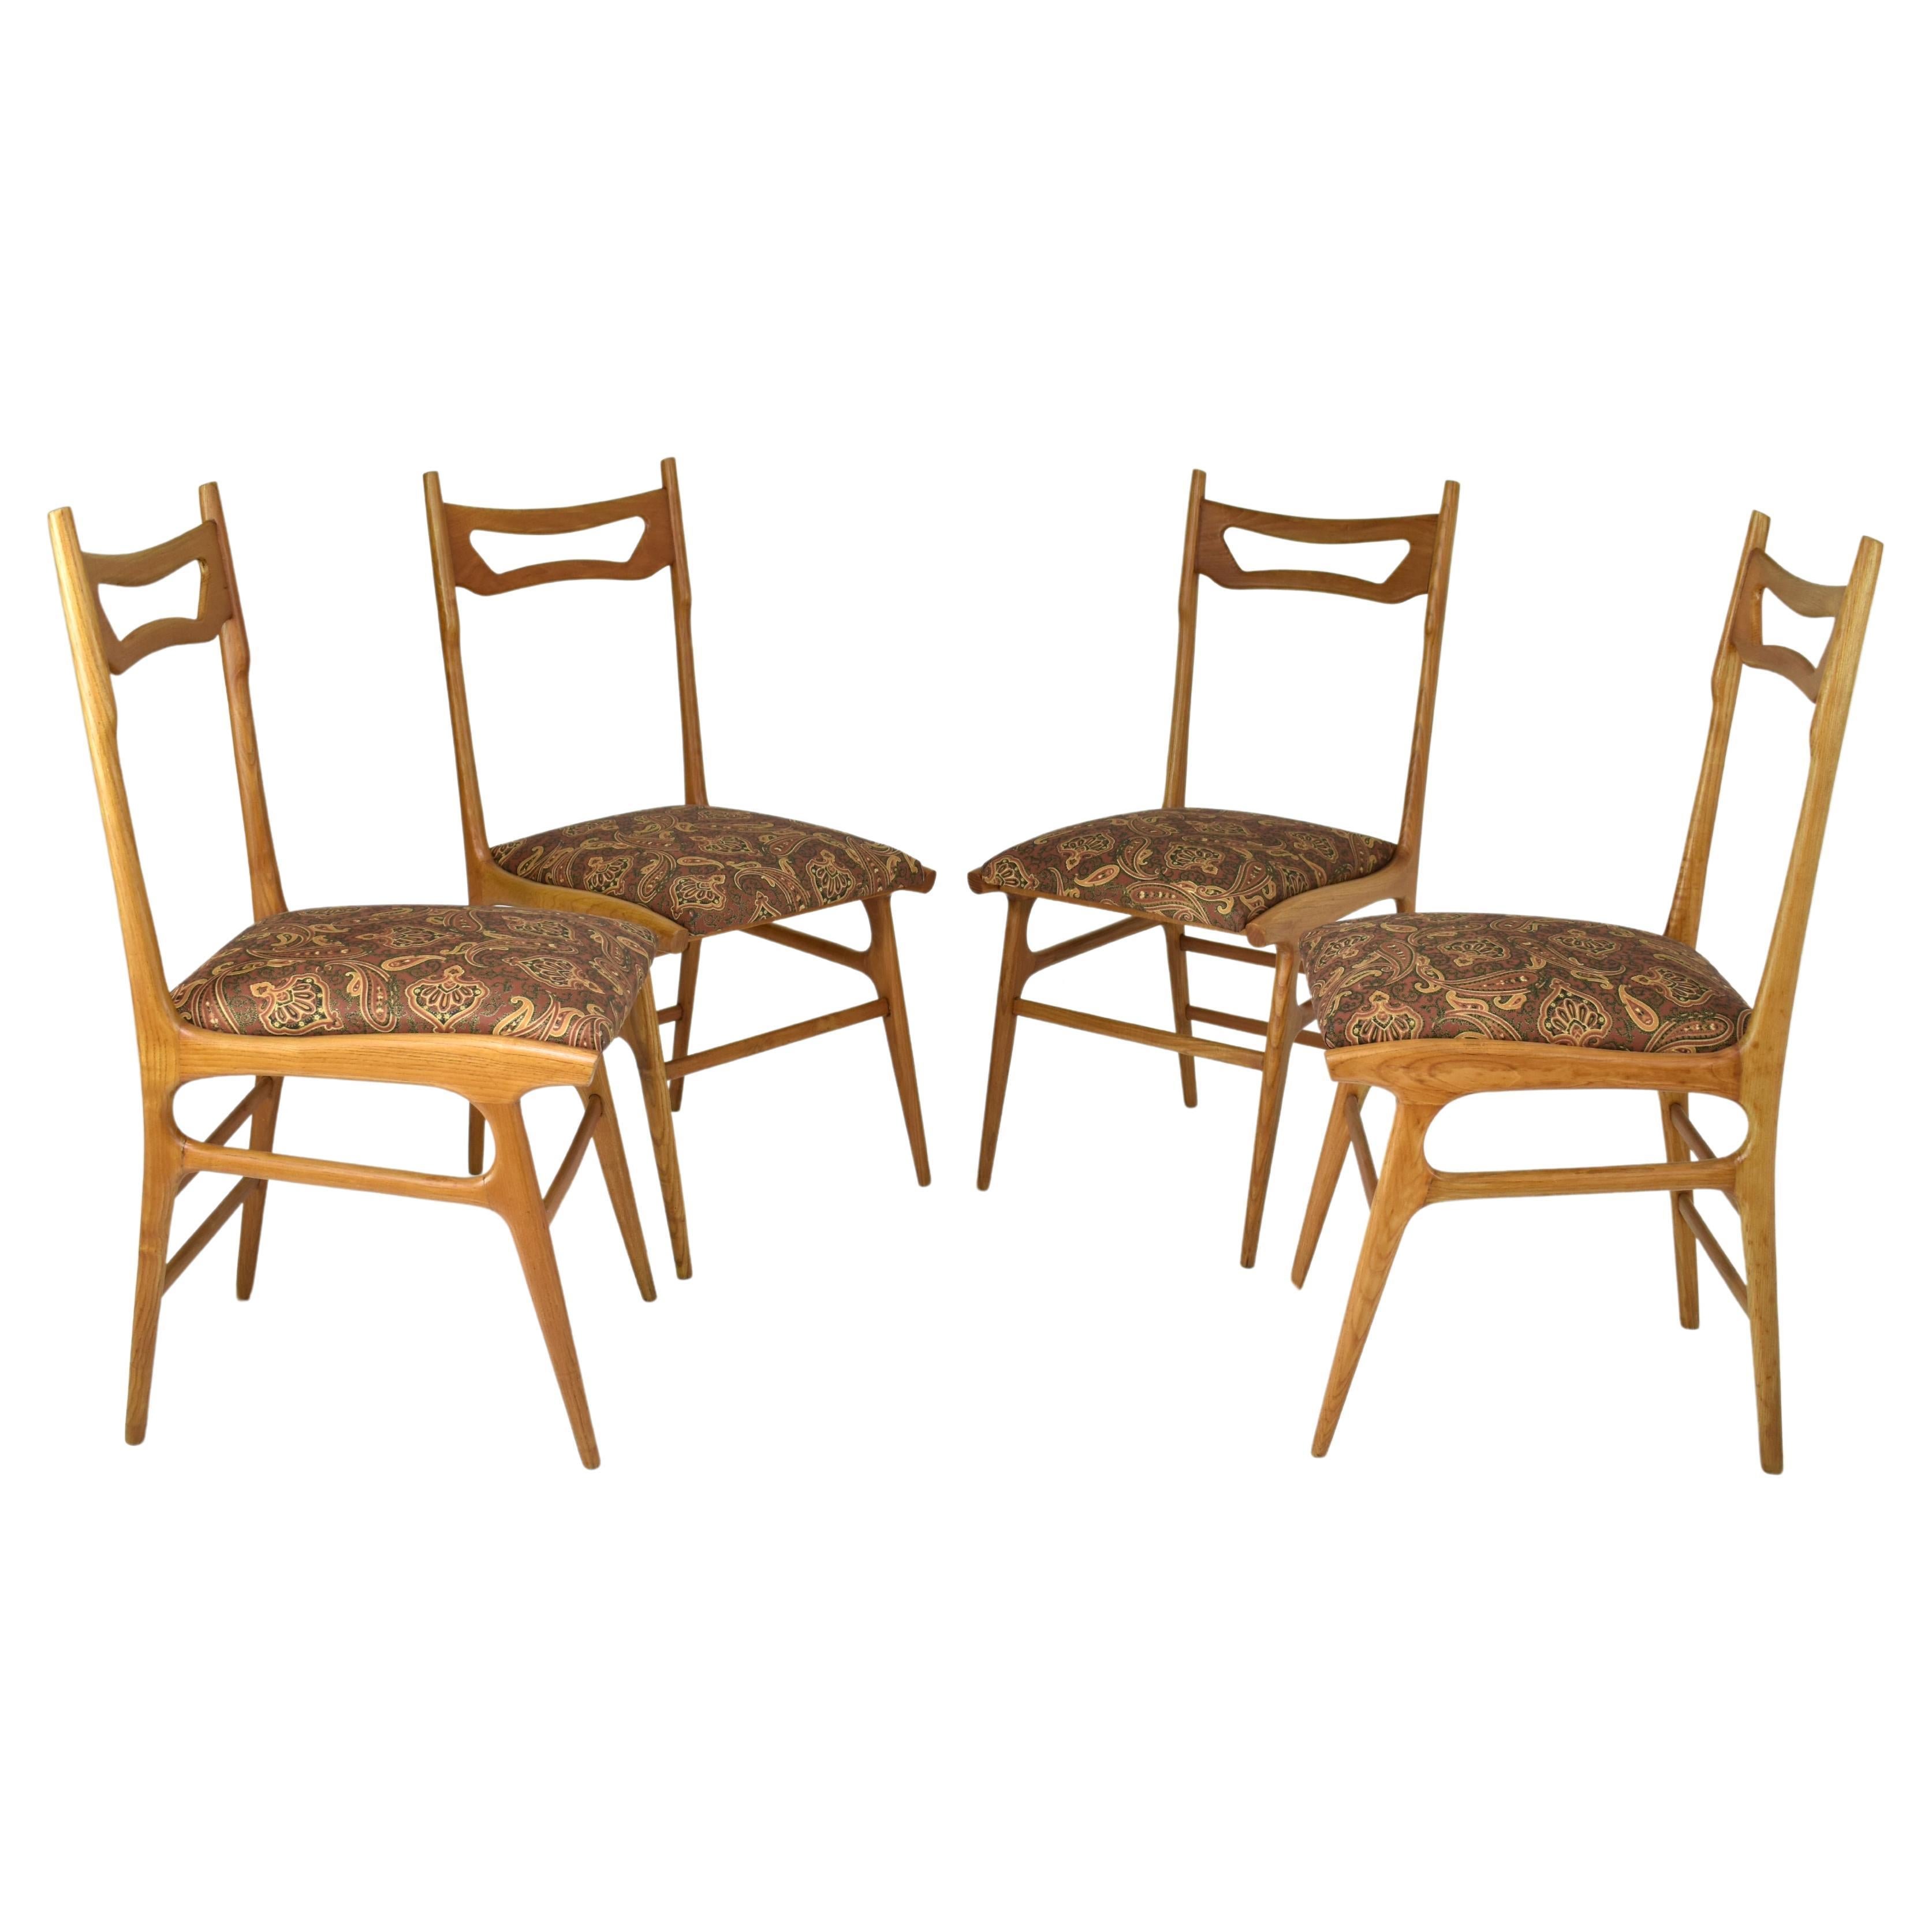 Italian Vintage Wooden Dining Chairs, Set of Four, 1950s For Sale